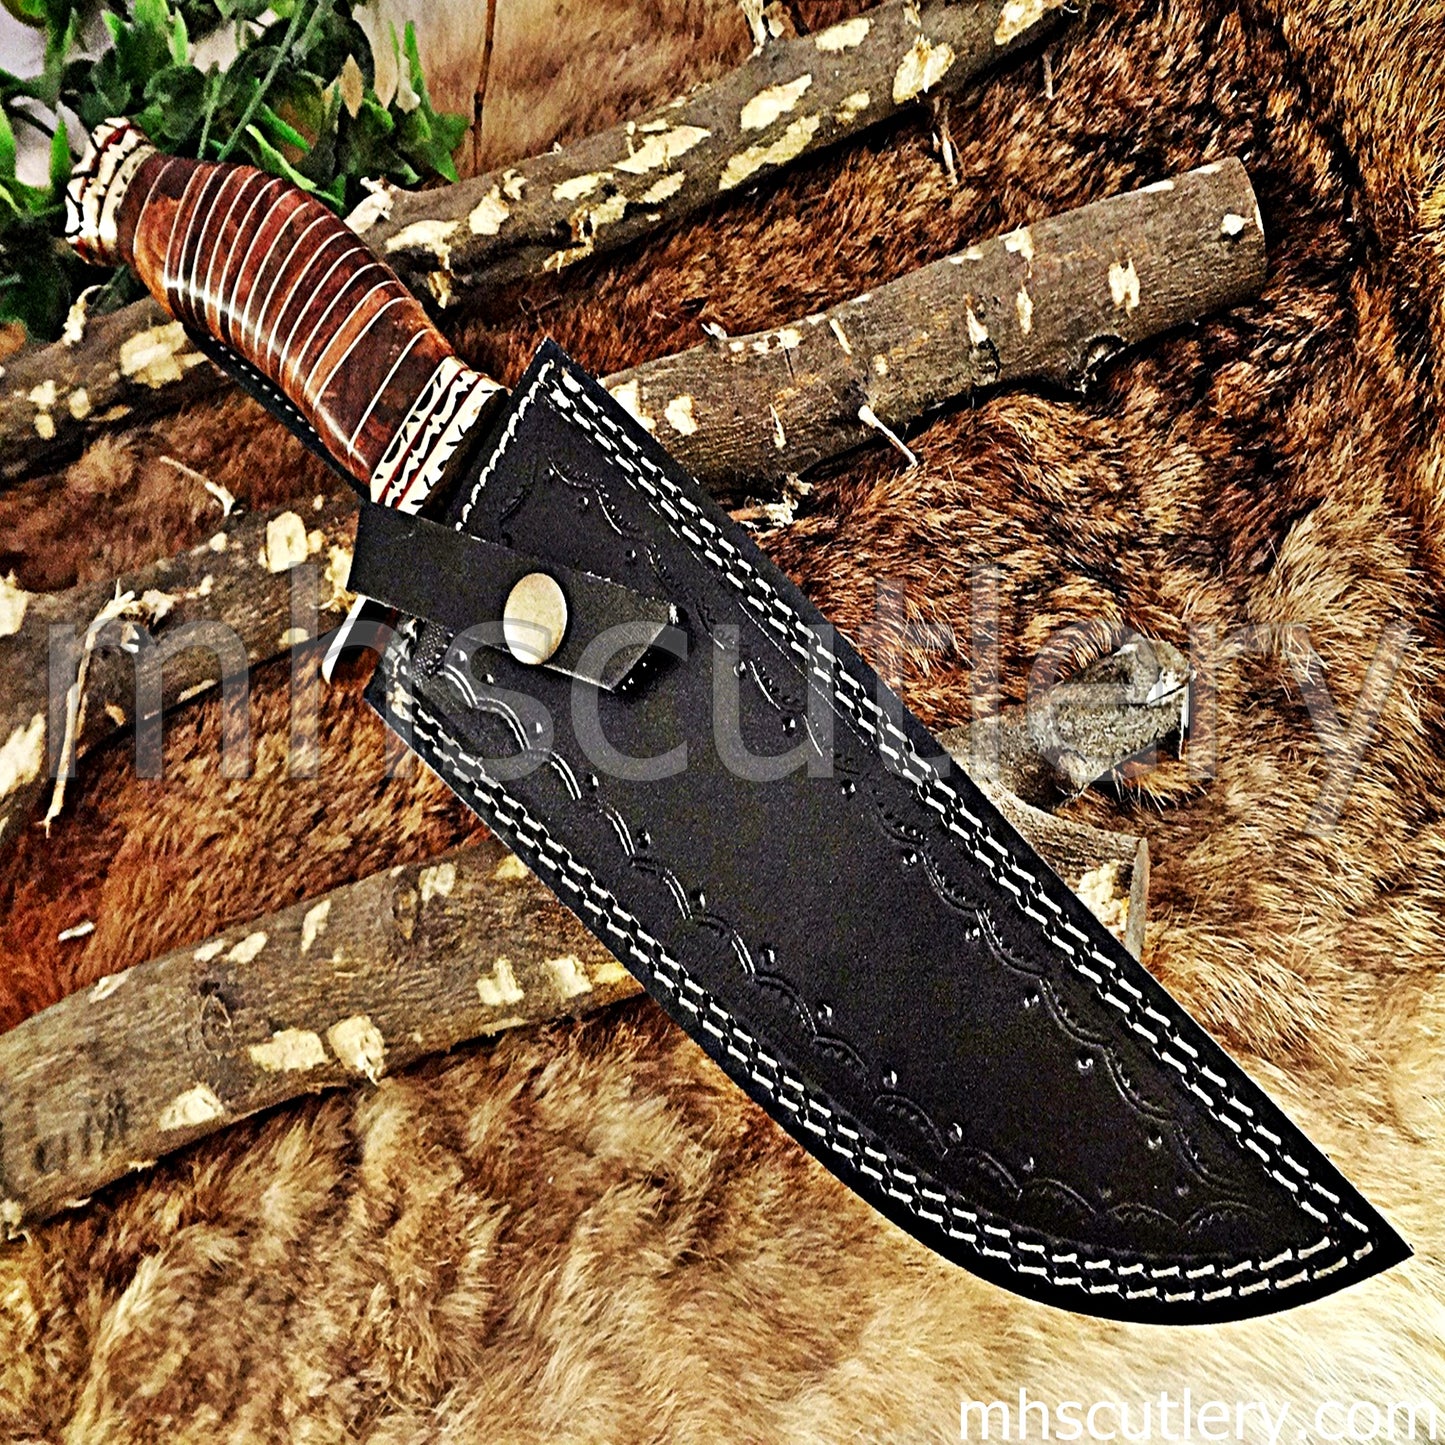 Hand Forged Damascus Steel Bowie Hunting Knife / Fancy Handle | mhscutlery